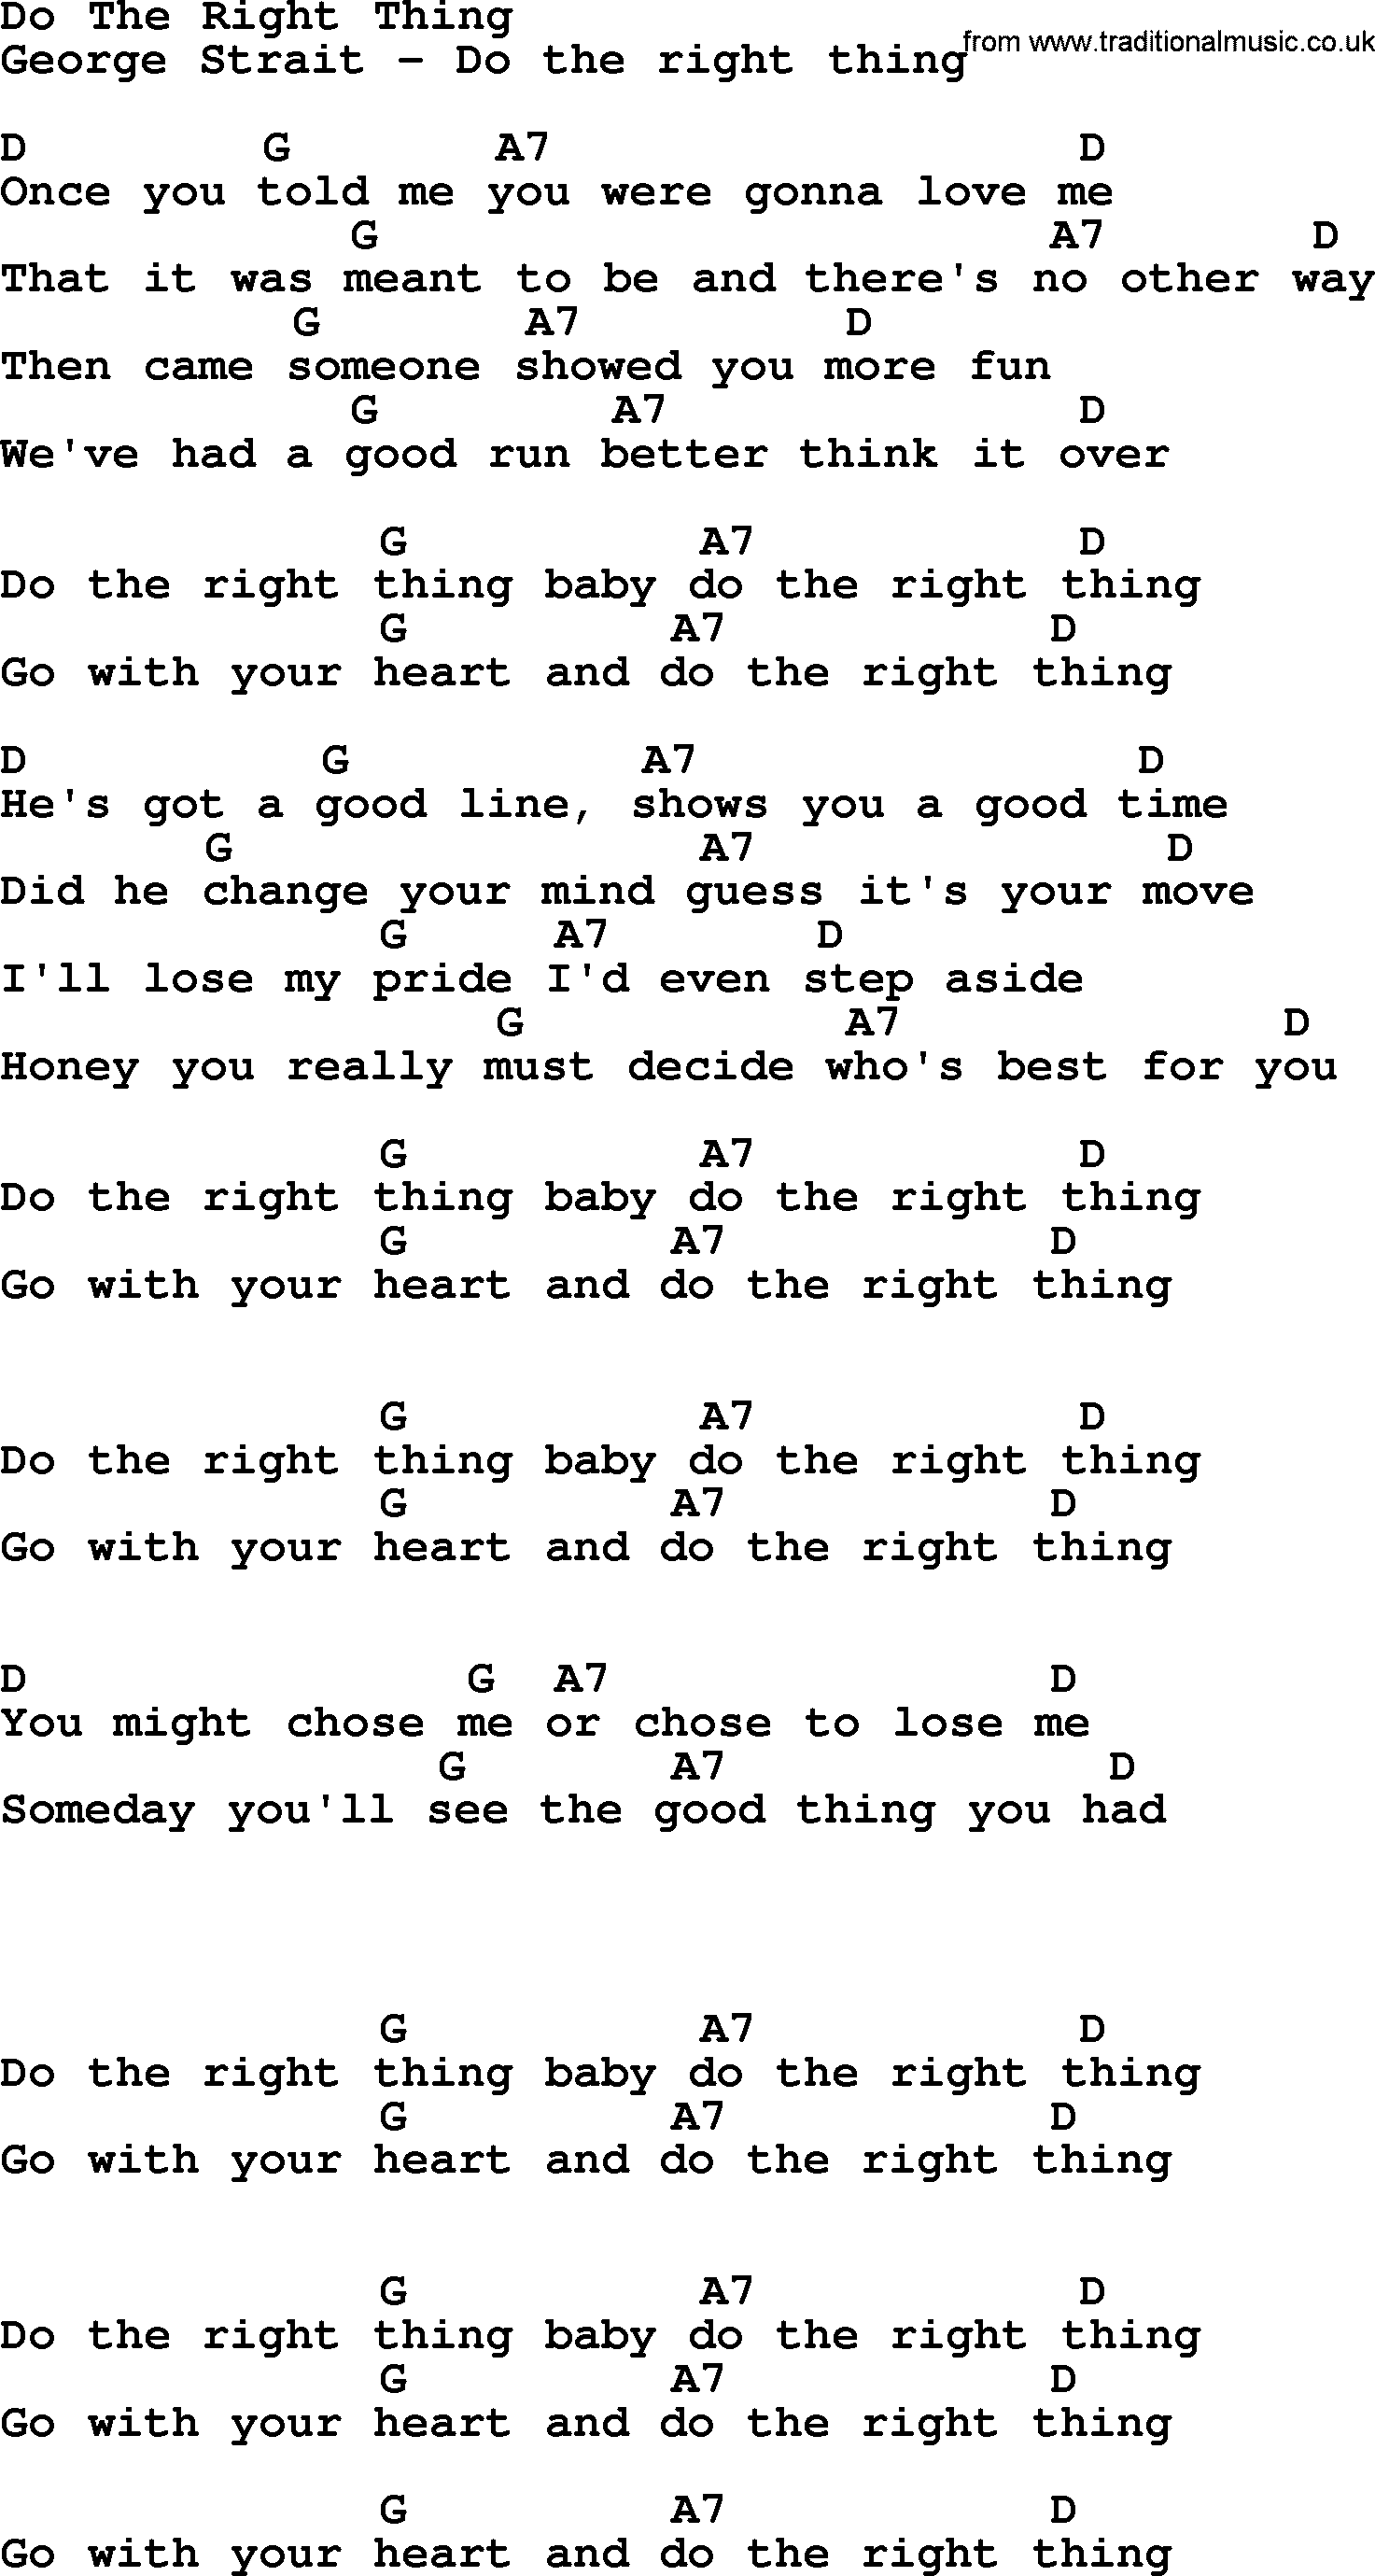 George Strait song: Do The Right Thing, lyrics and chords